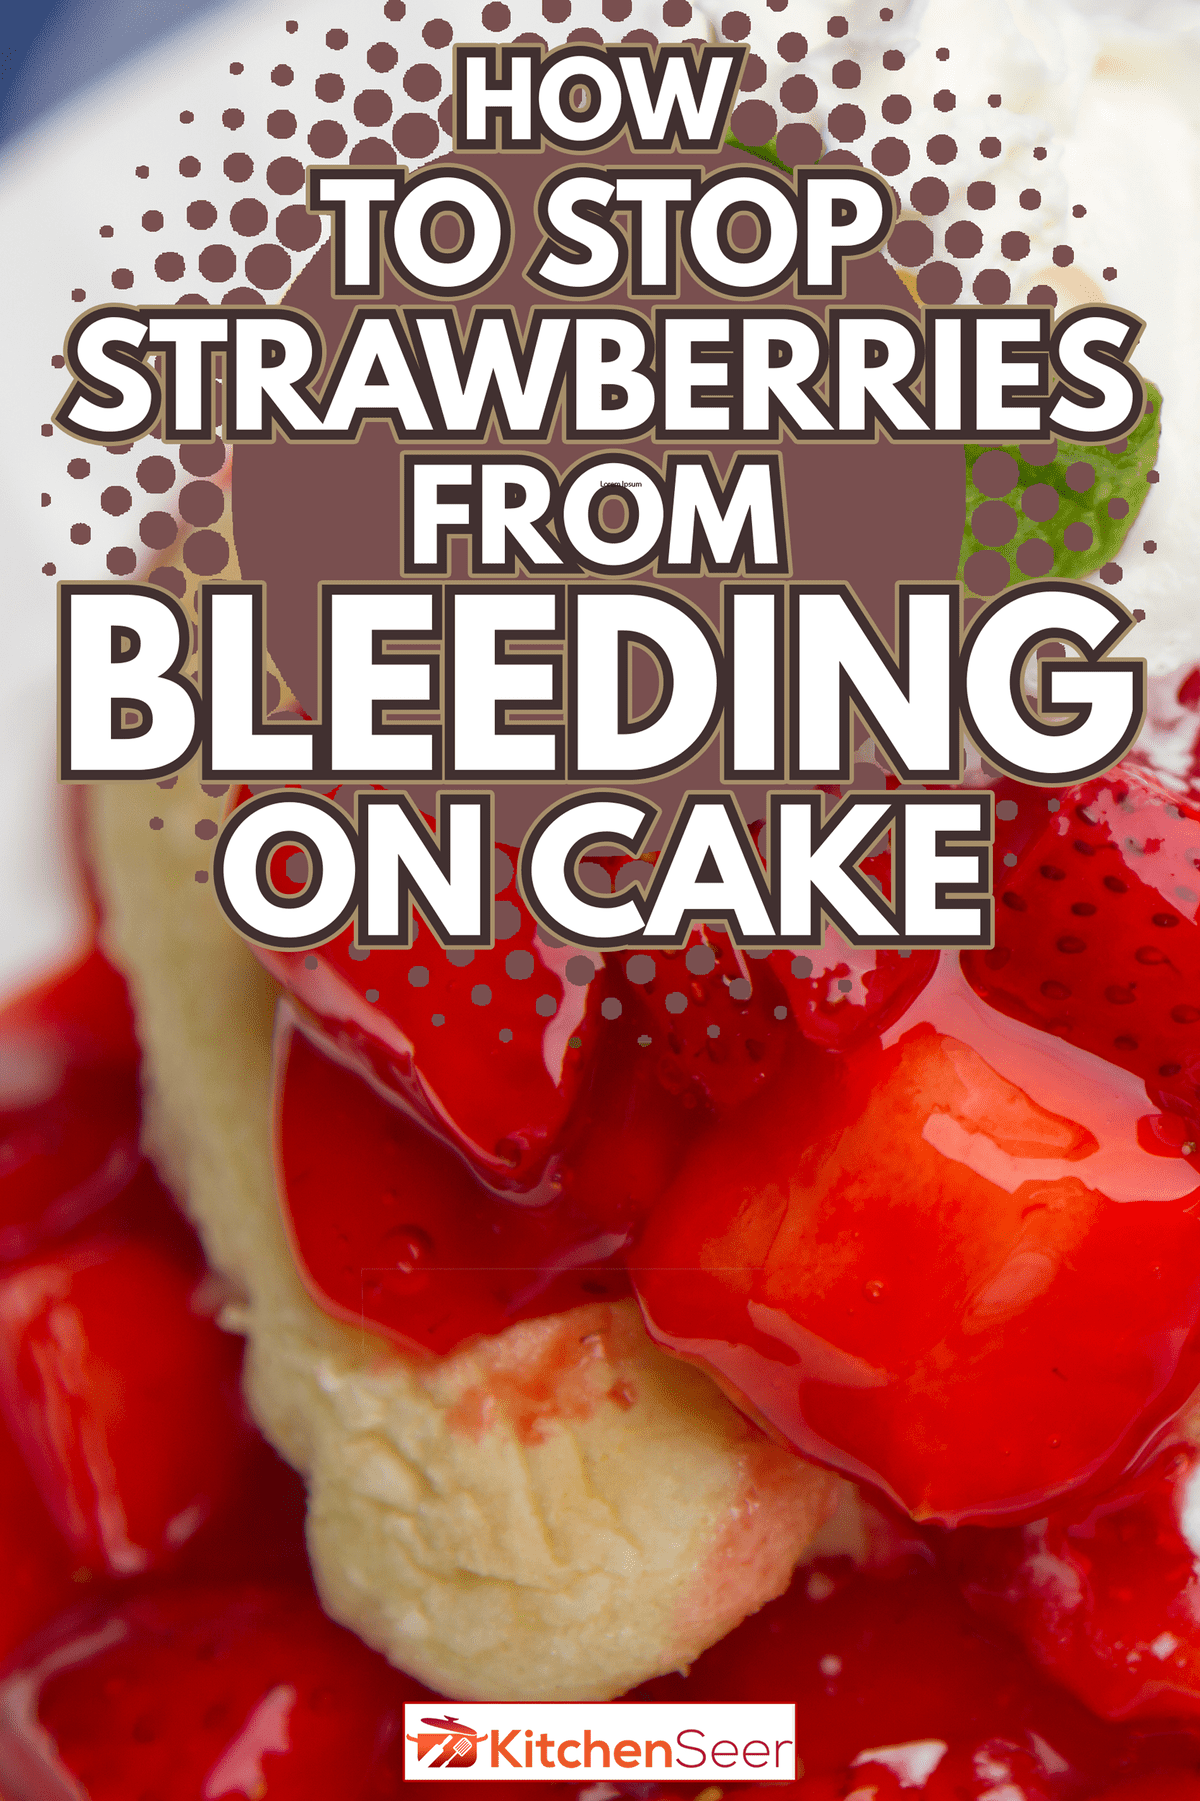 strawberry shortcake shallow depth of view - How To Stop Strawberries From Bleeding On Cake